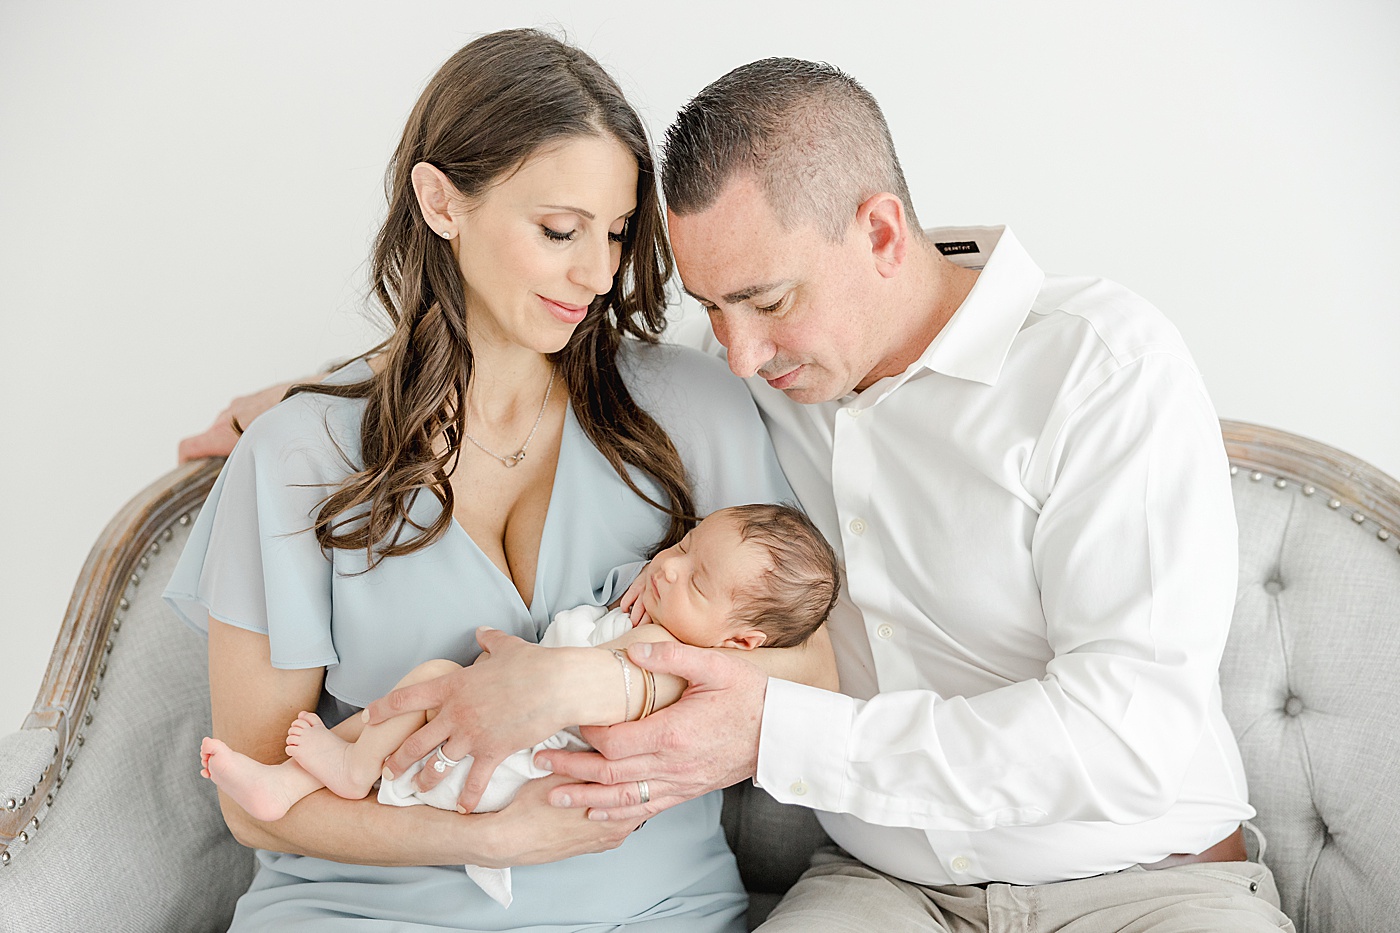 Studio newborn photos for parents and baby boy with Kristin Wood Photography.